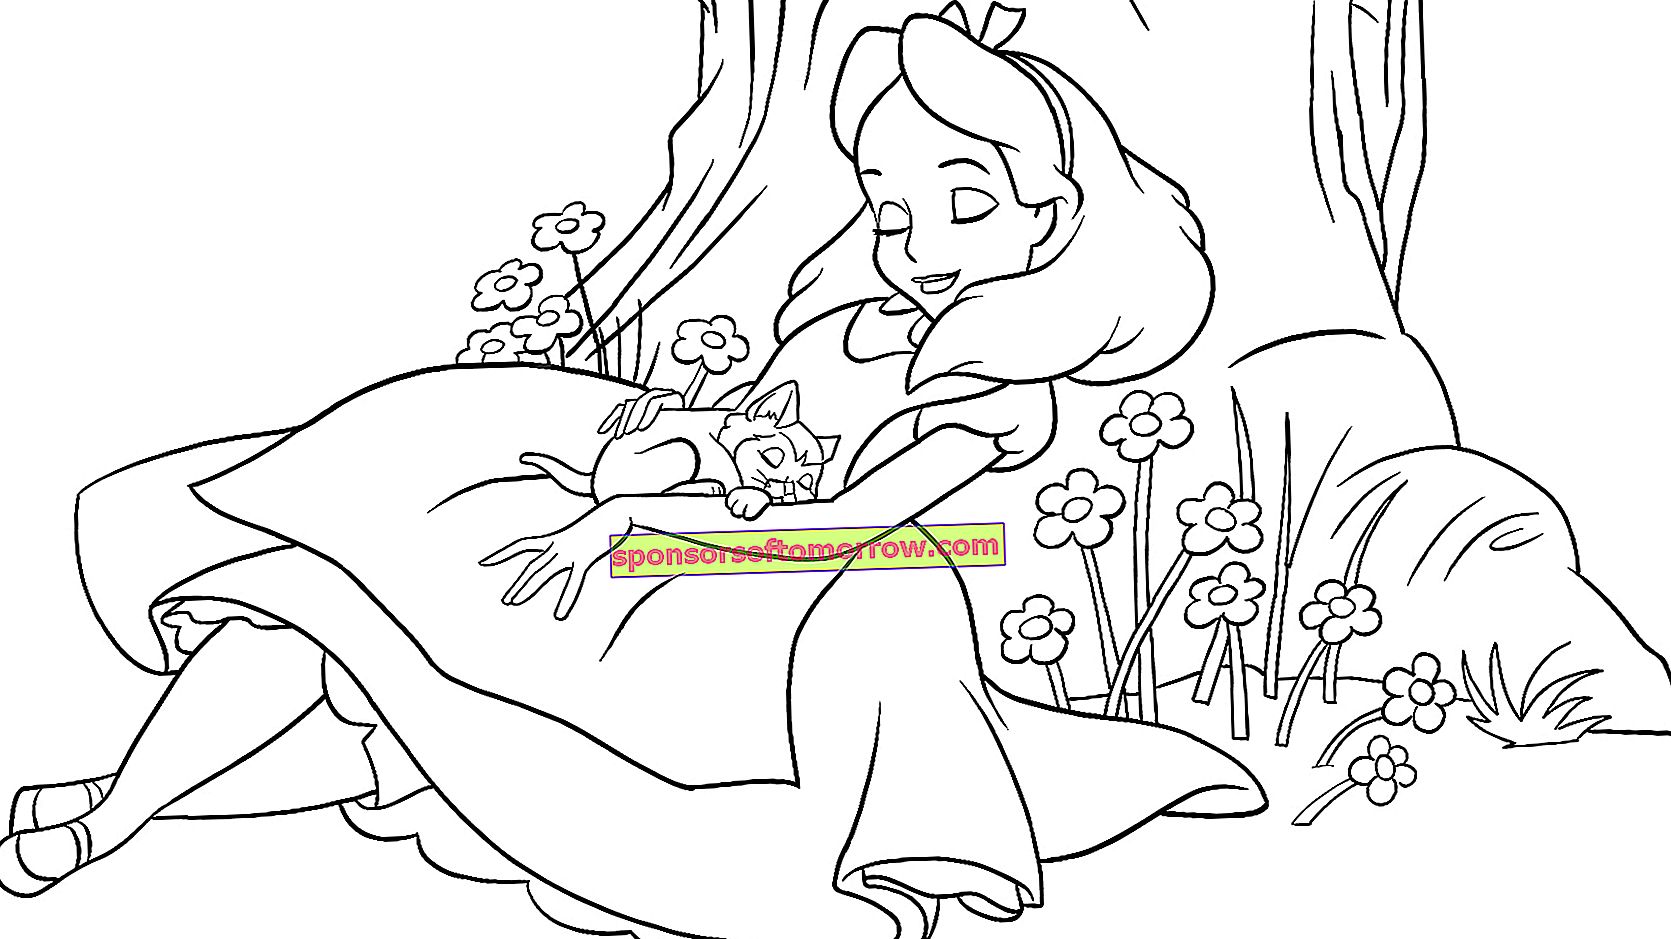 More than 300 Disney coloring pages that you can download and print 1